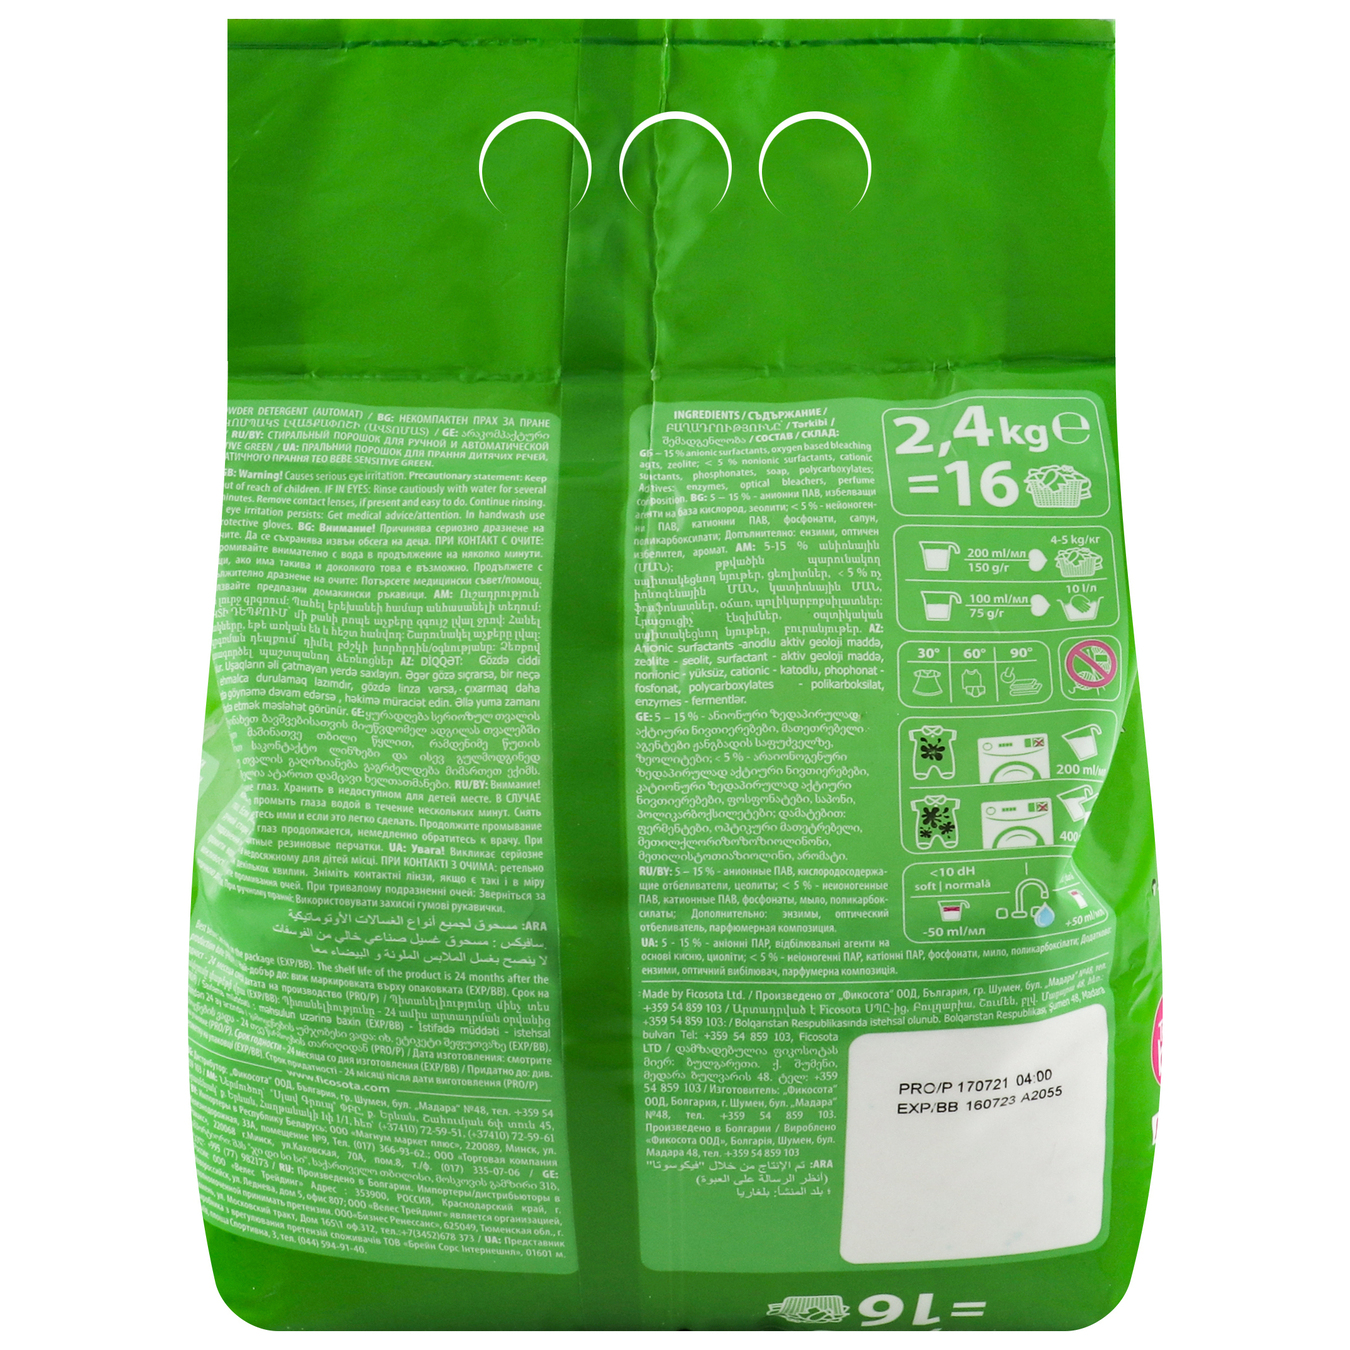 Teo Bebe Green Laundry Detergent for Baby Products 2,4kg 2